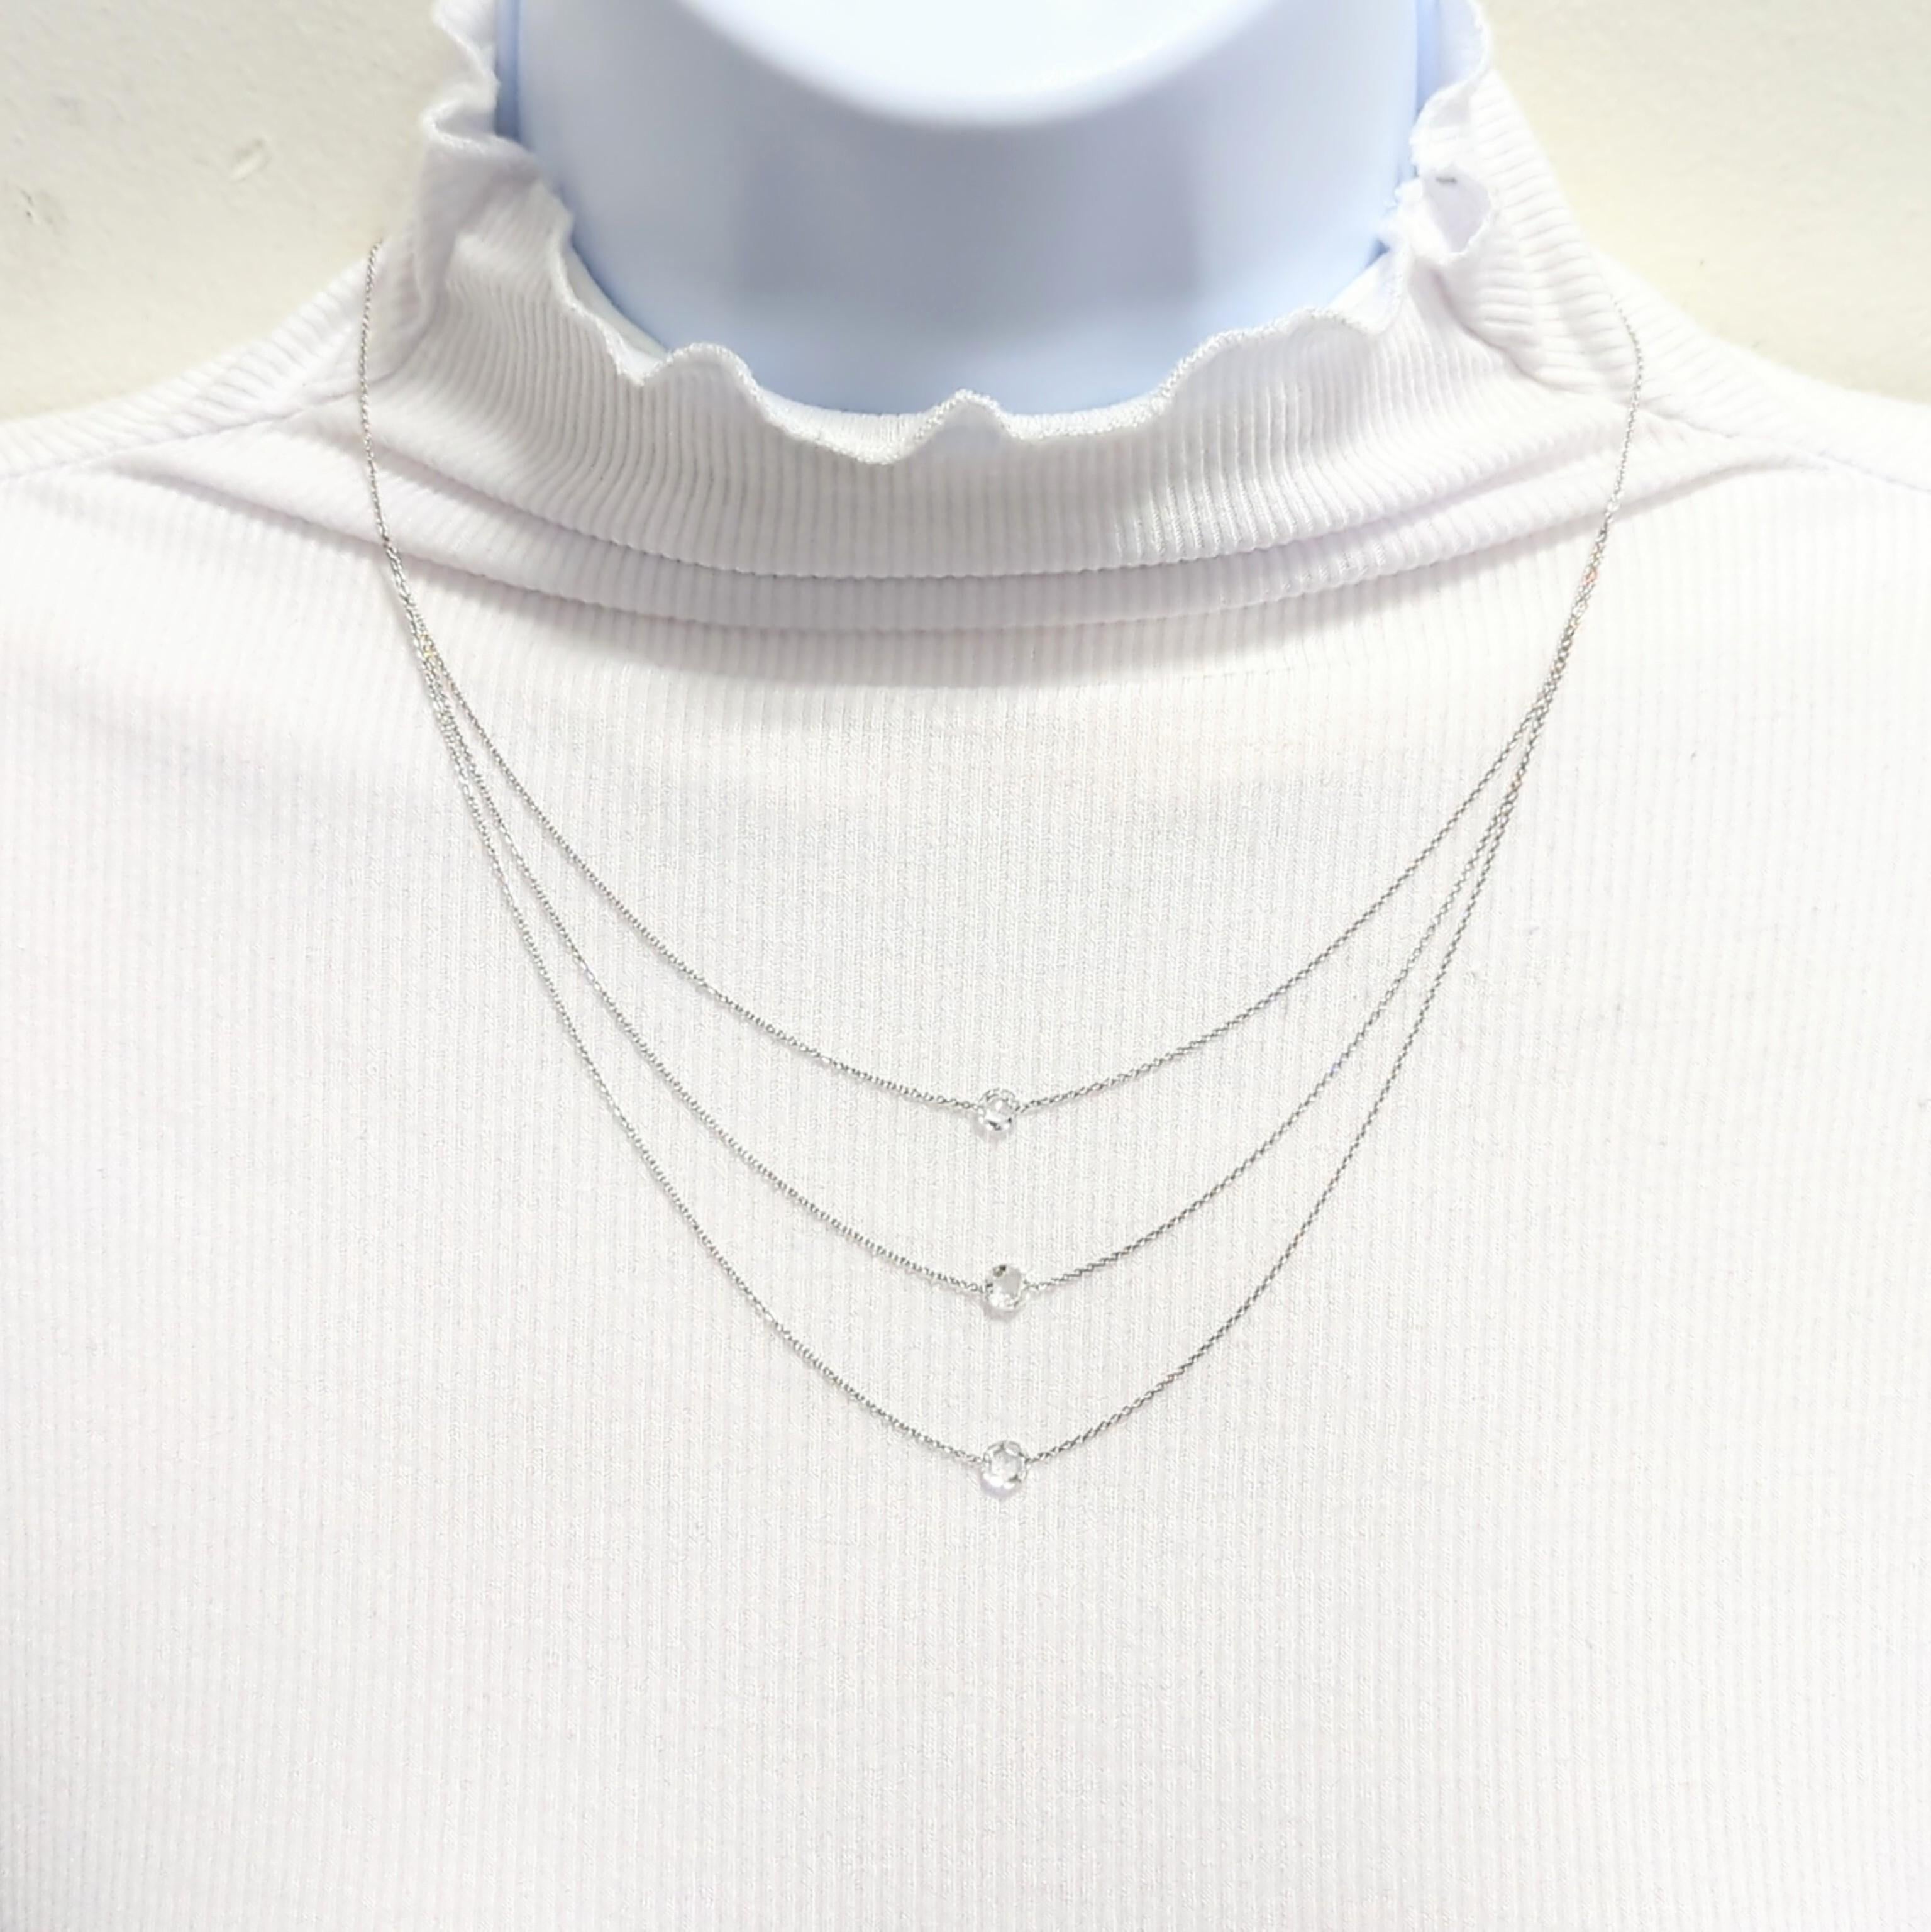 Beautiful rosecut diamond necklace with 0.92 ct. good quality white diamond rounds.  Handmade in 18k white gold.  Three layers gives it a fun and frivolous look.